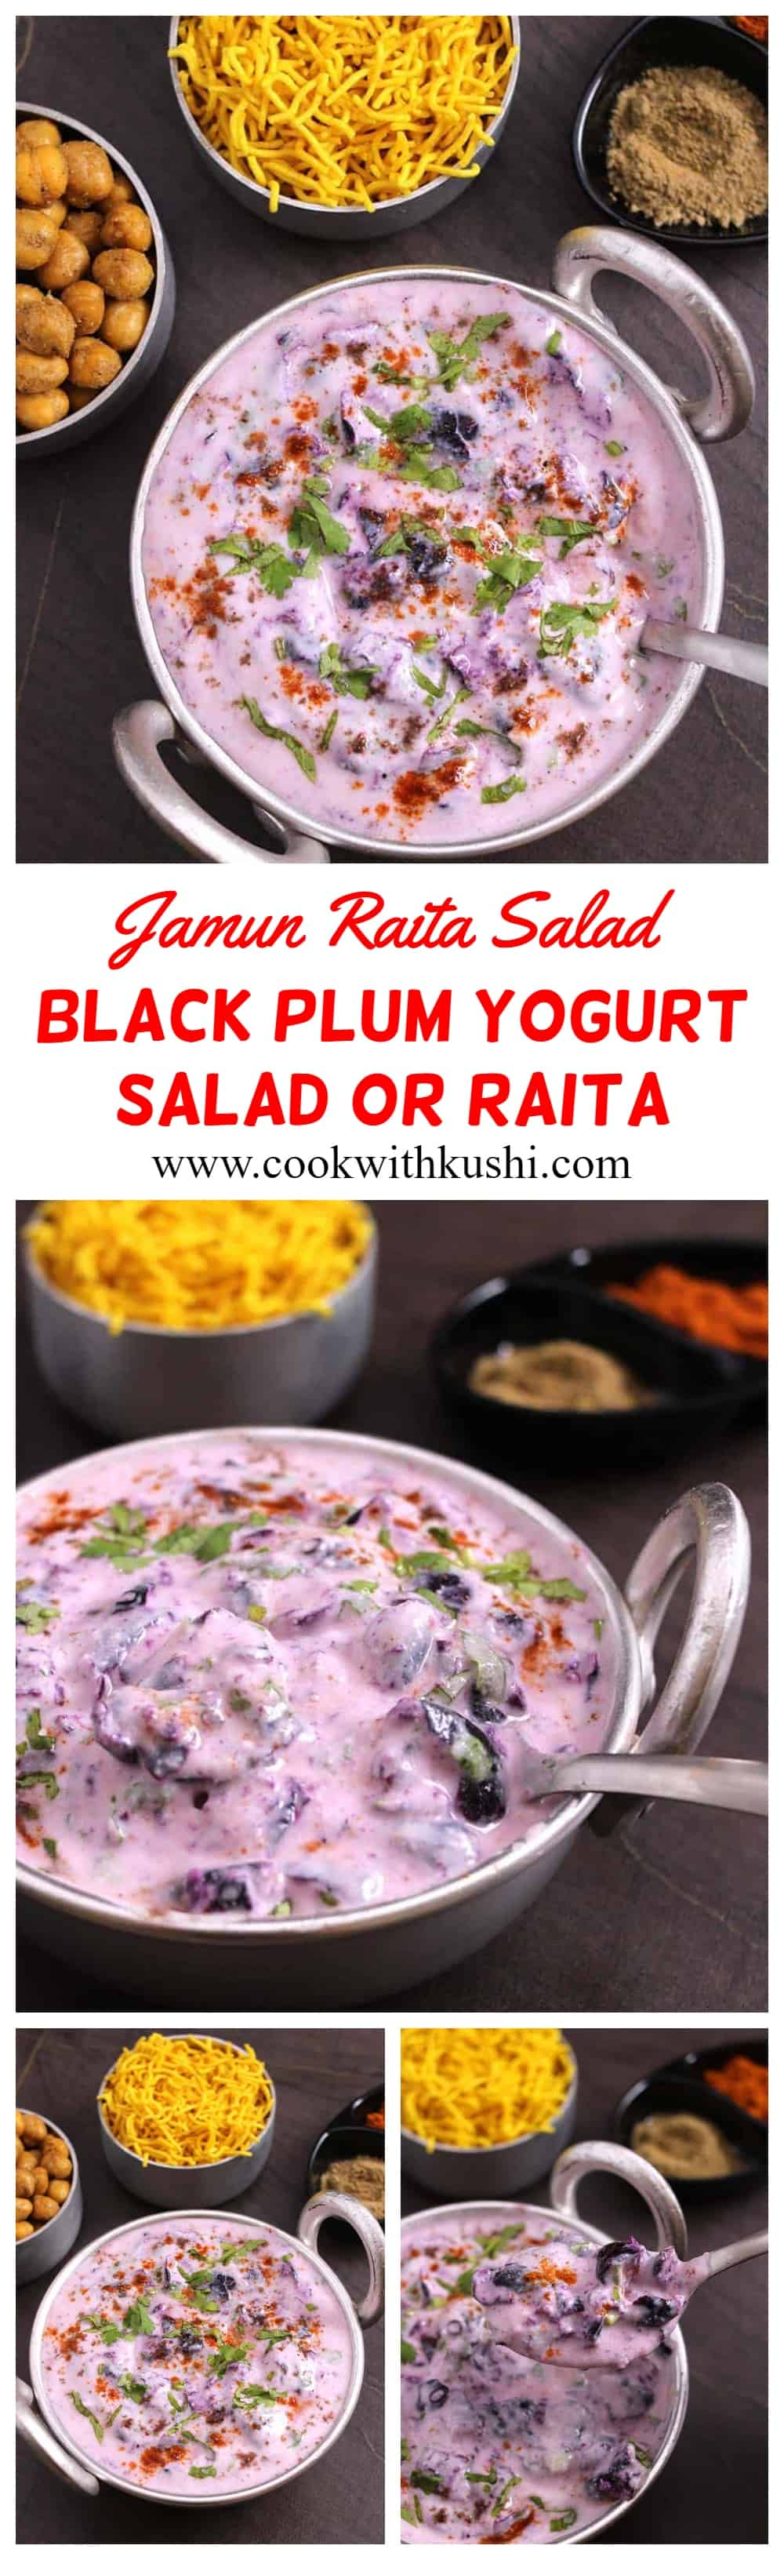 Jamun Raita or Black Plum Yogurt Salad is a refreshing, healthy, and delicious Indian recipe, prepared in less than 5 minutes that can be served as a side or condiment with any meal. One of the best recipes to try during summer when jamuns are in season. #raita #yogurt #dahi #curds #biryani #diabeticrecipes #dietfood #weightlossfood #blackplum #javaplum #blackberry #jamunrecipe #pachadi #thambuli #vegetarianrecipes #lunch #dinner #keto #palepo #whole30